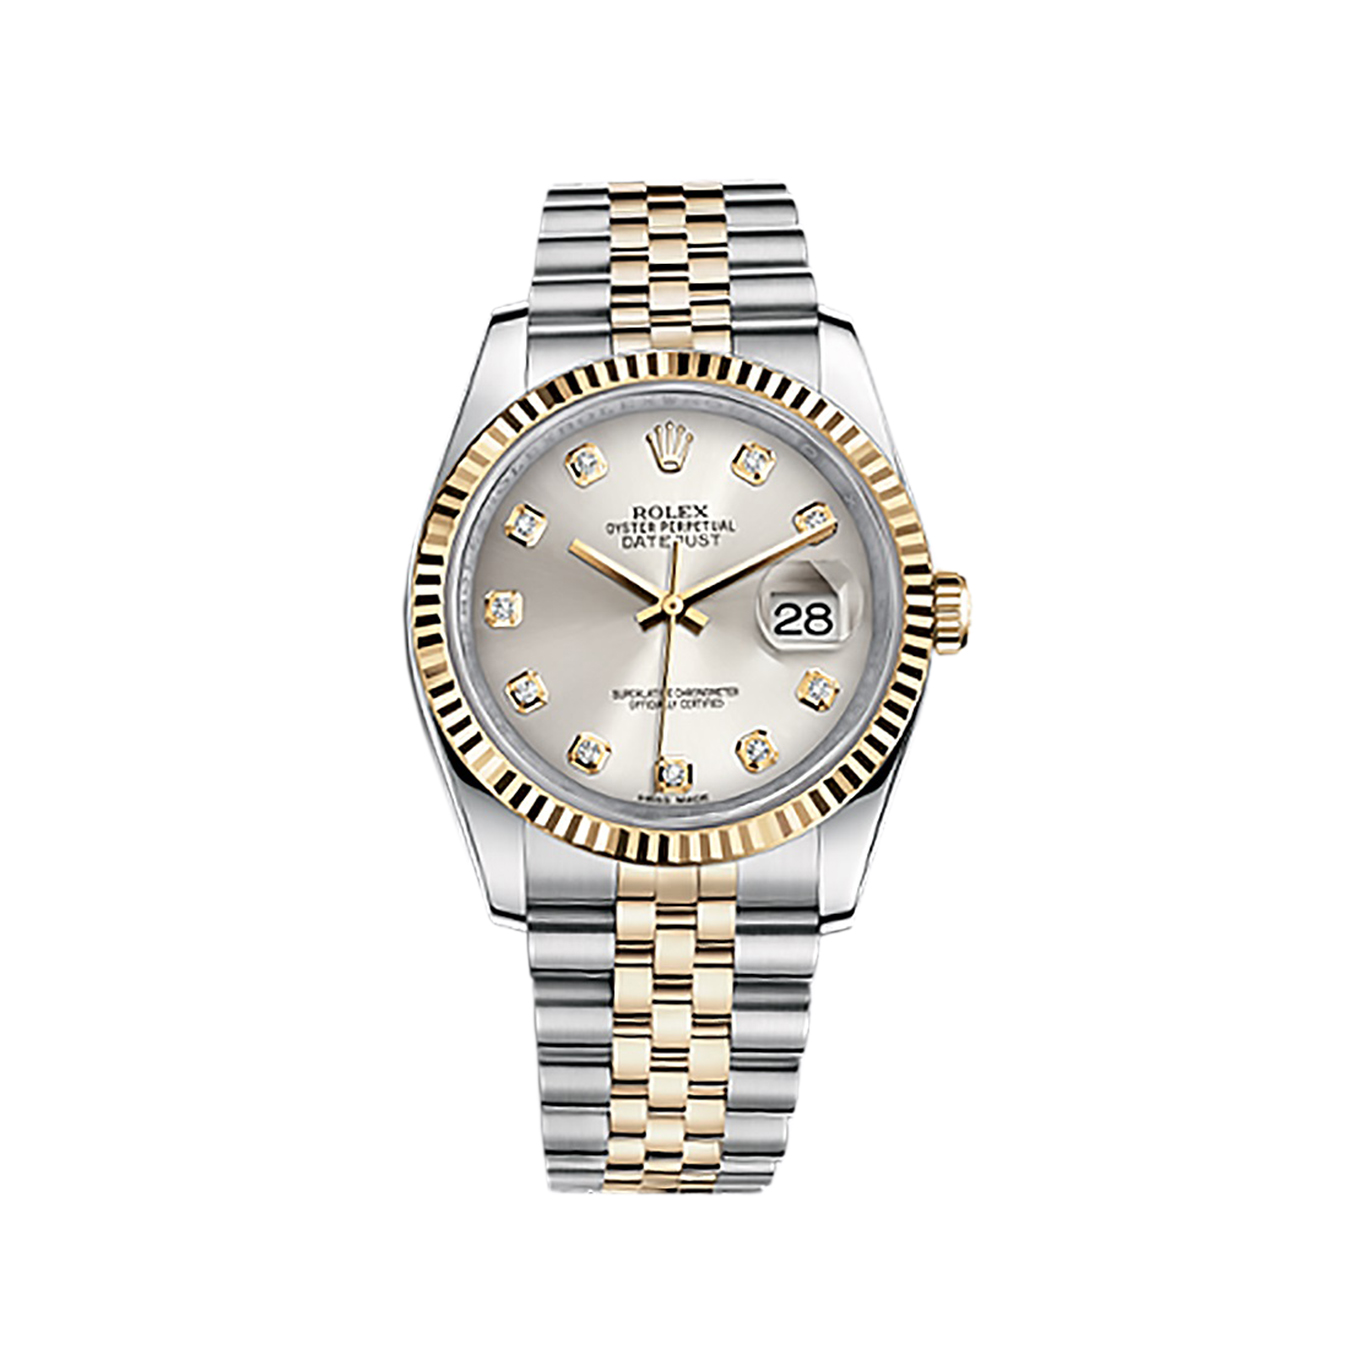 Datejust 36 116233 Gold & Stainless Steel Watch (Silver Set with Diamonds)